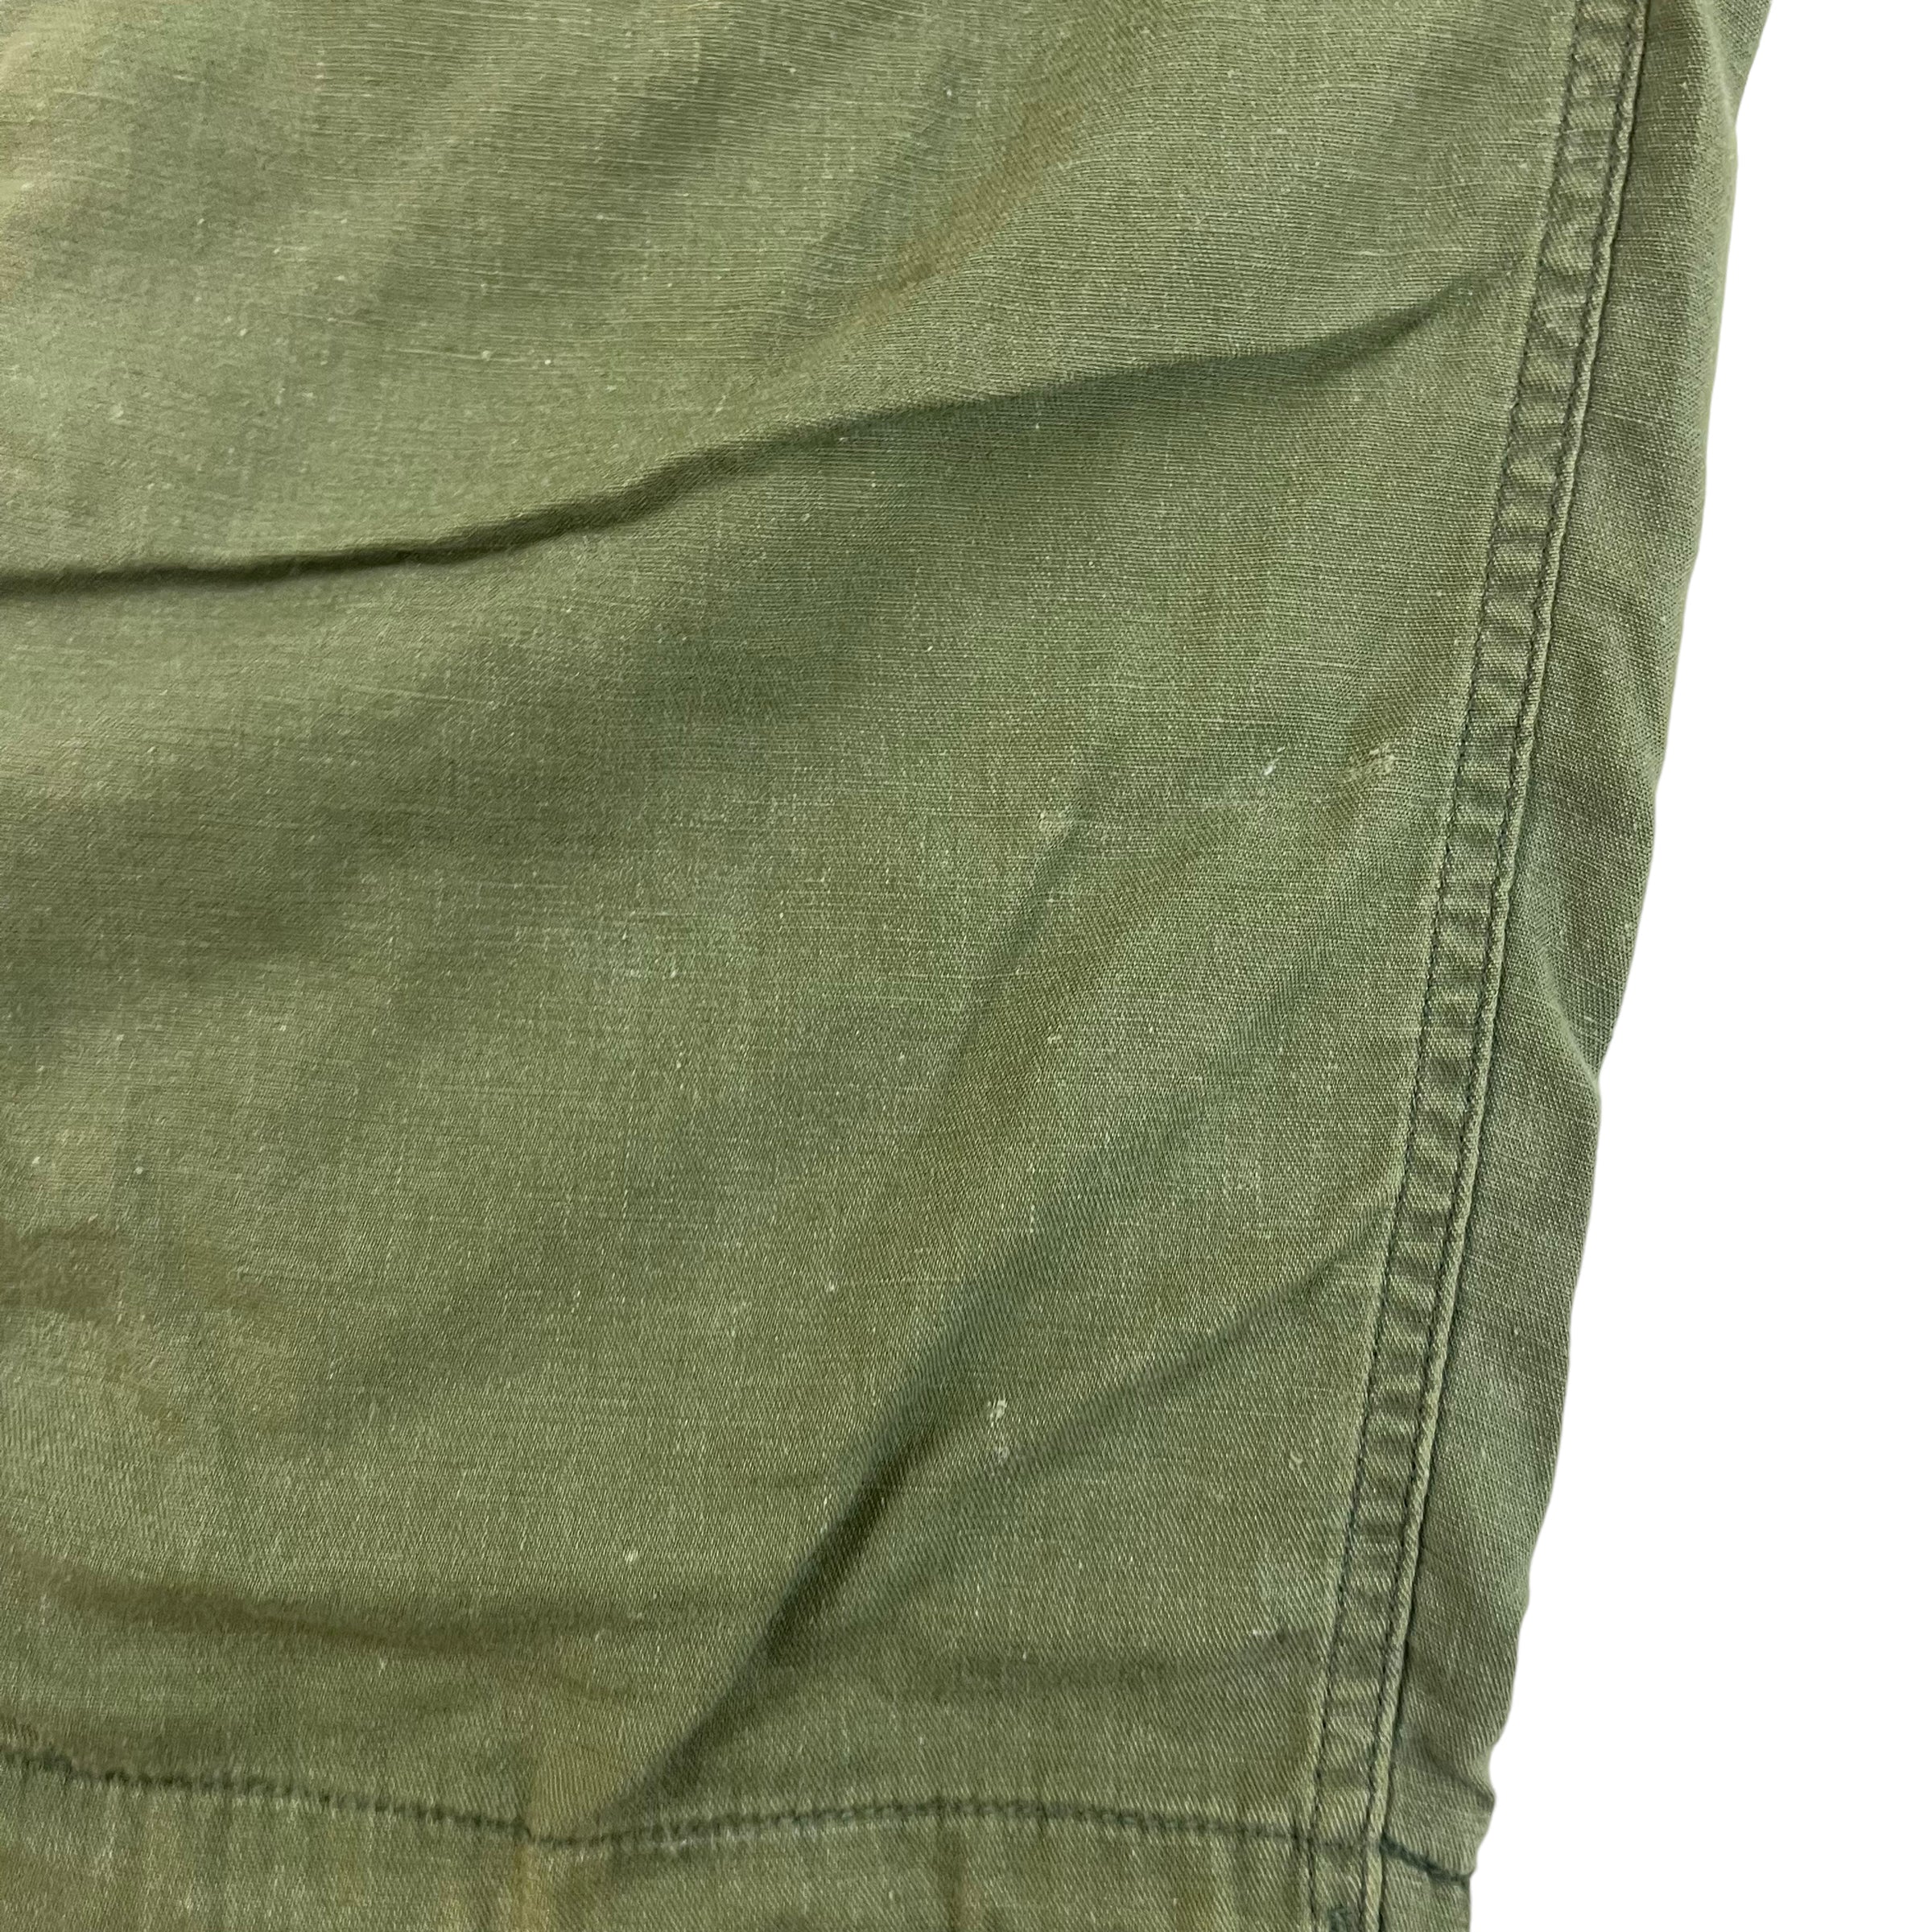 Vintage Chemical Protective Cargos Olive